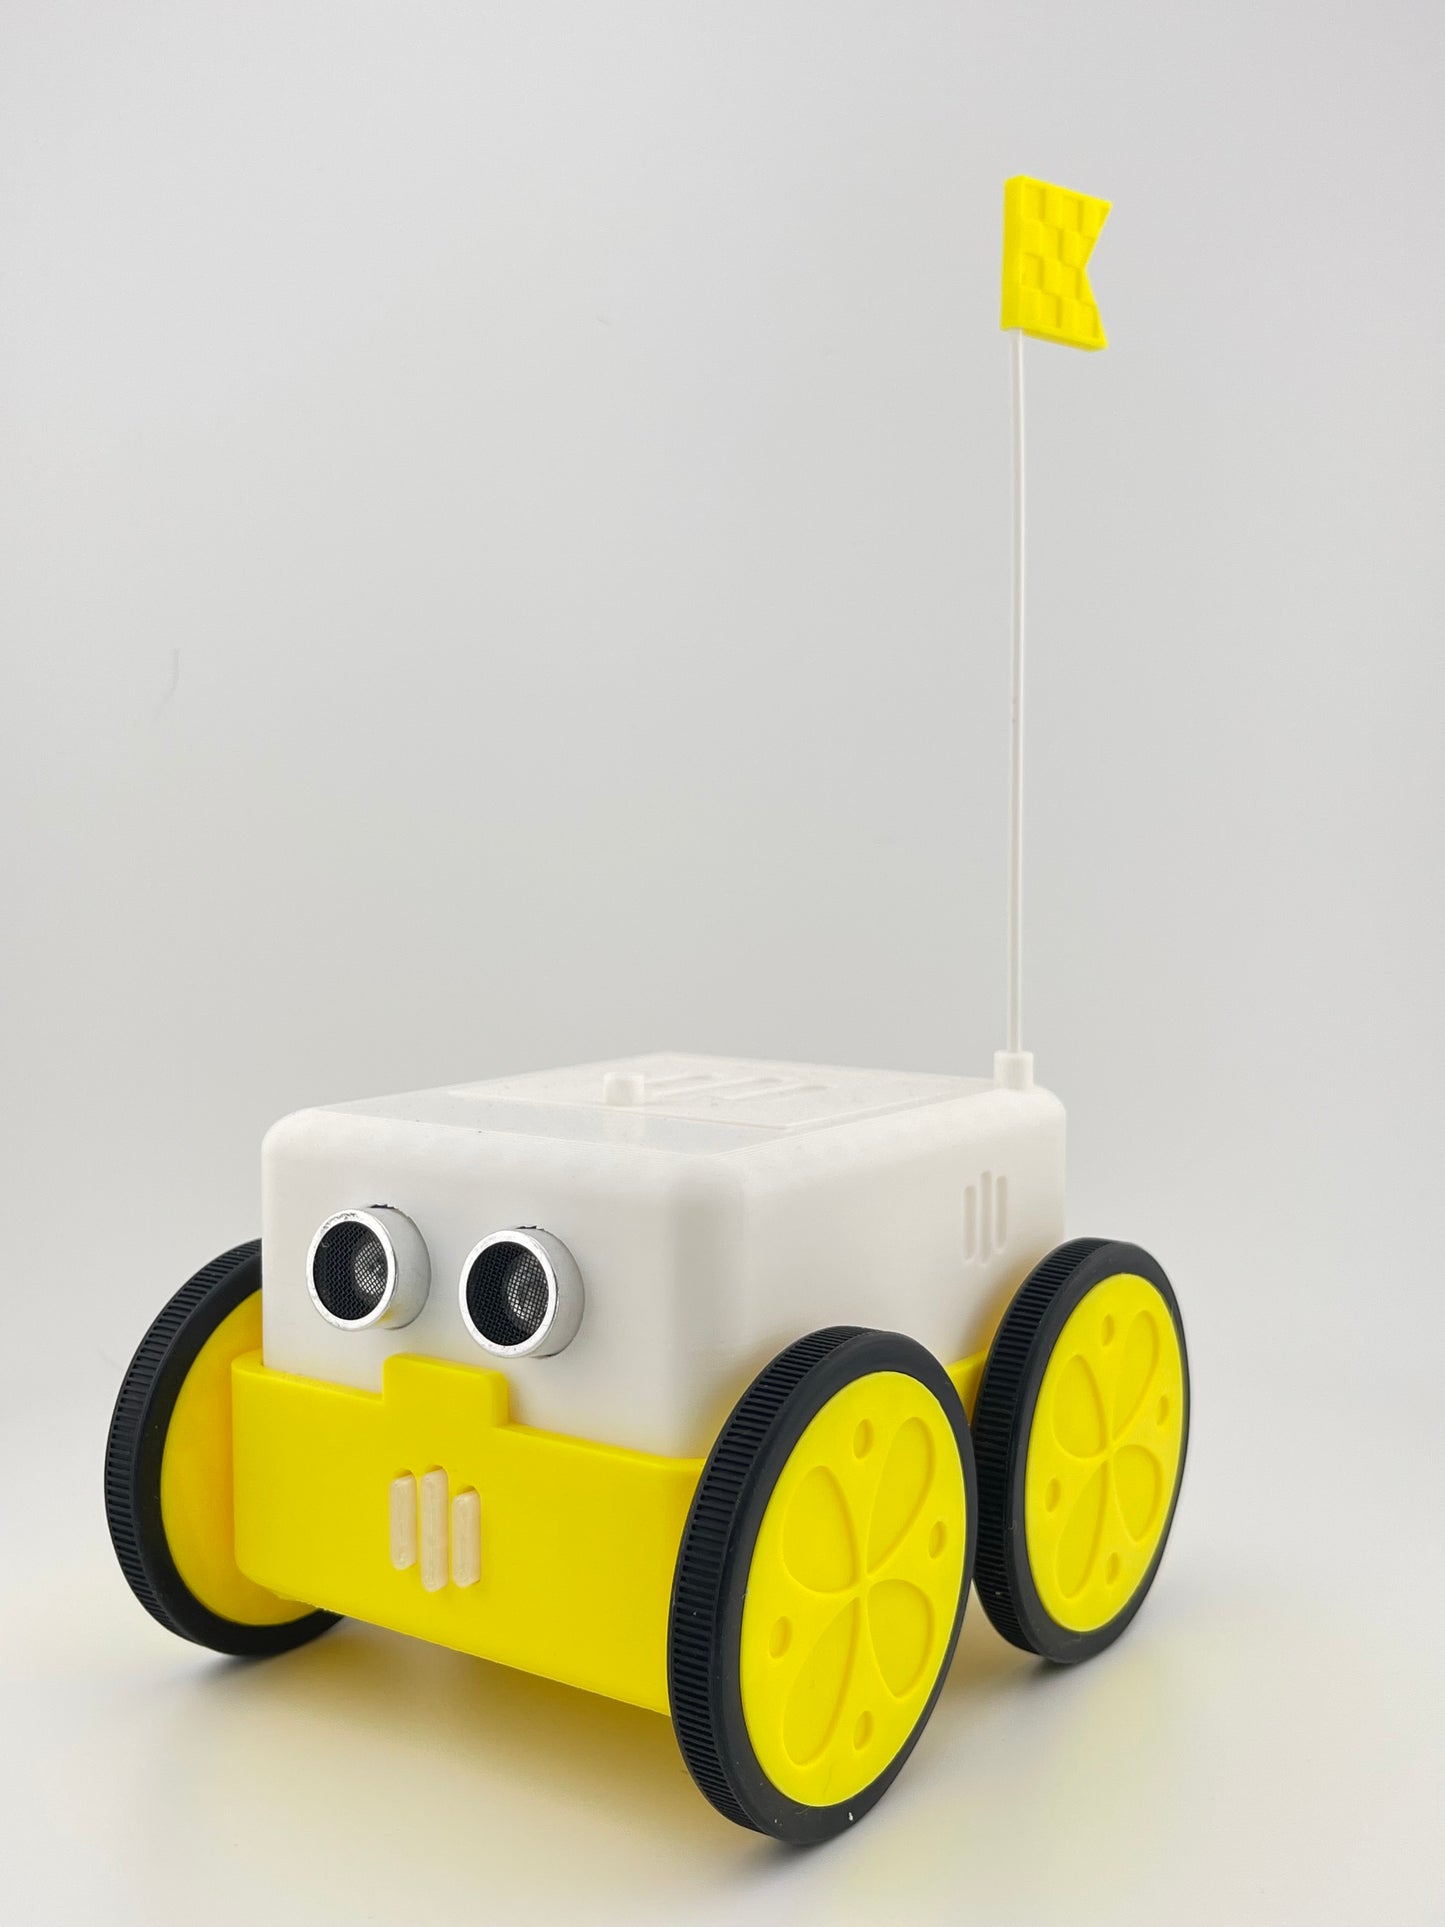 Cube Delivery Robot - Micro:Bit Version